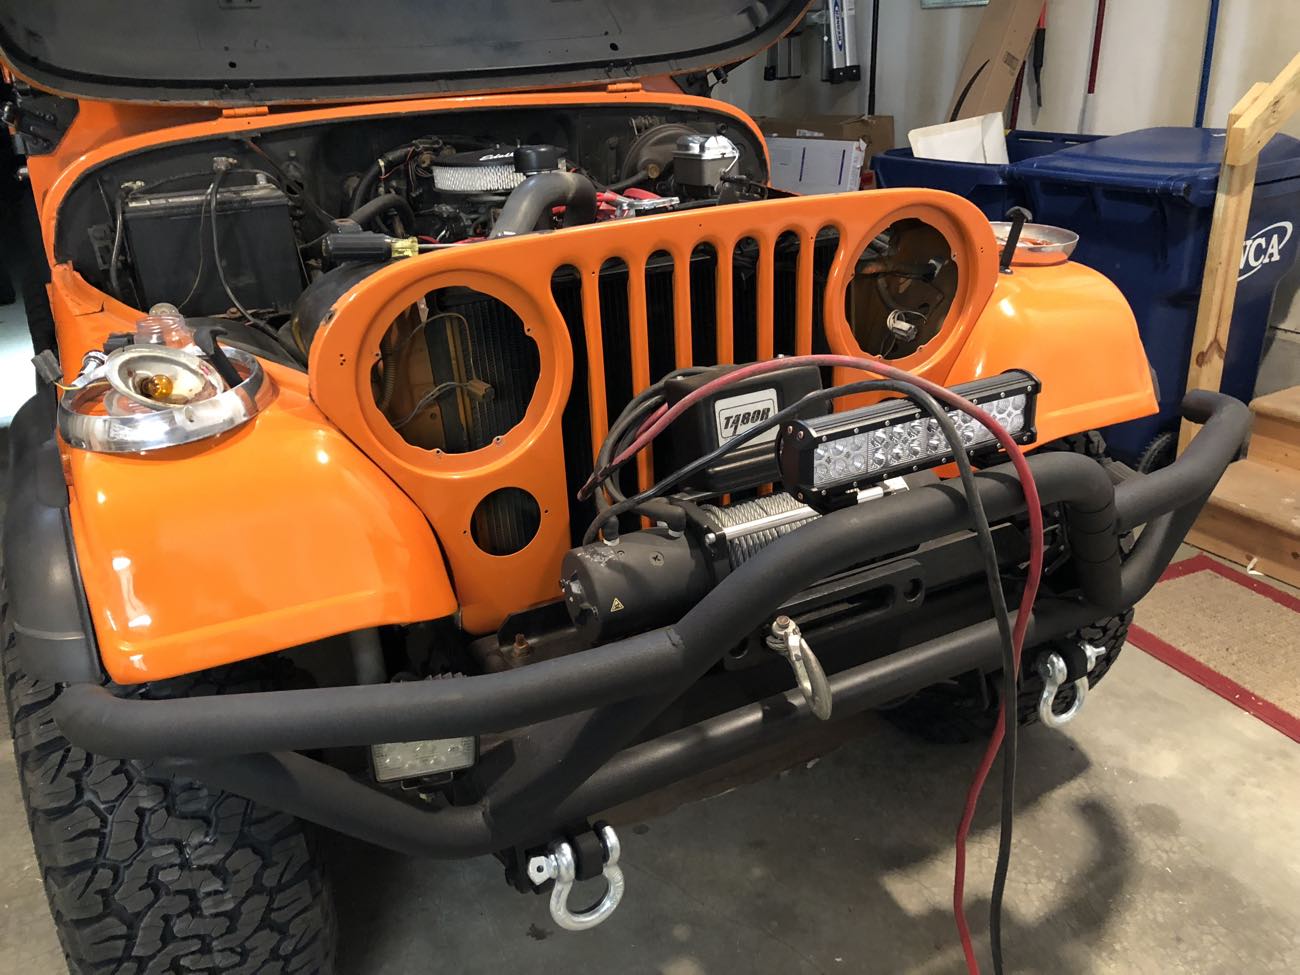 Jeep CJ-7 Chrome Front Grill Overlay Installation